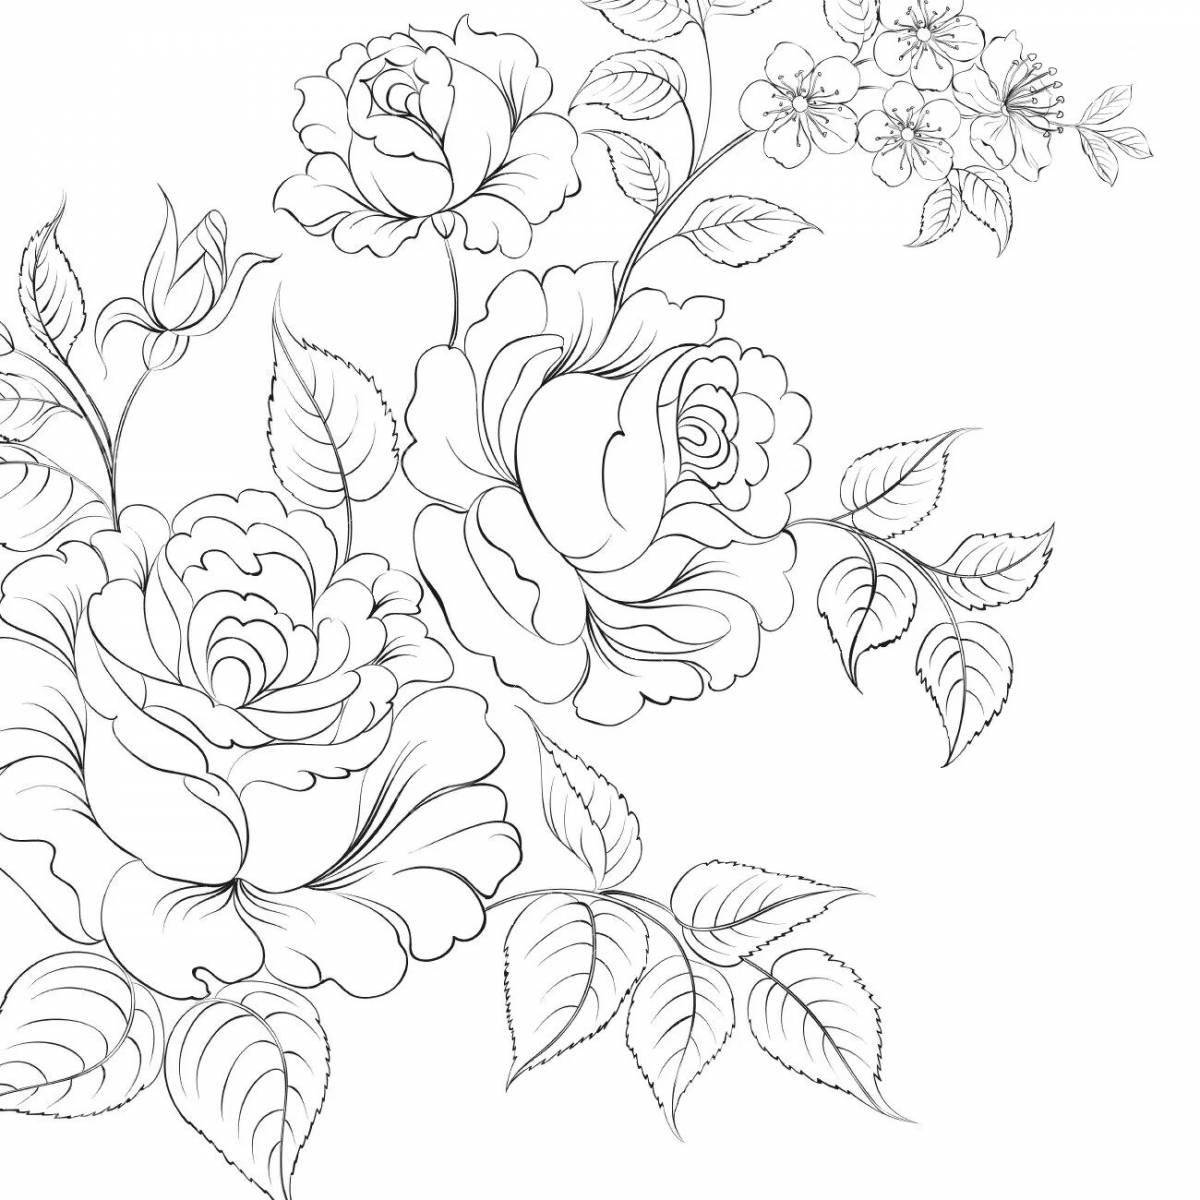 Bright flowers Zhostovo coloring book